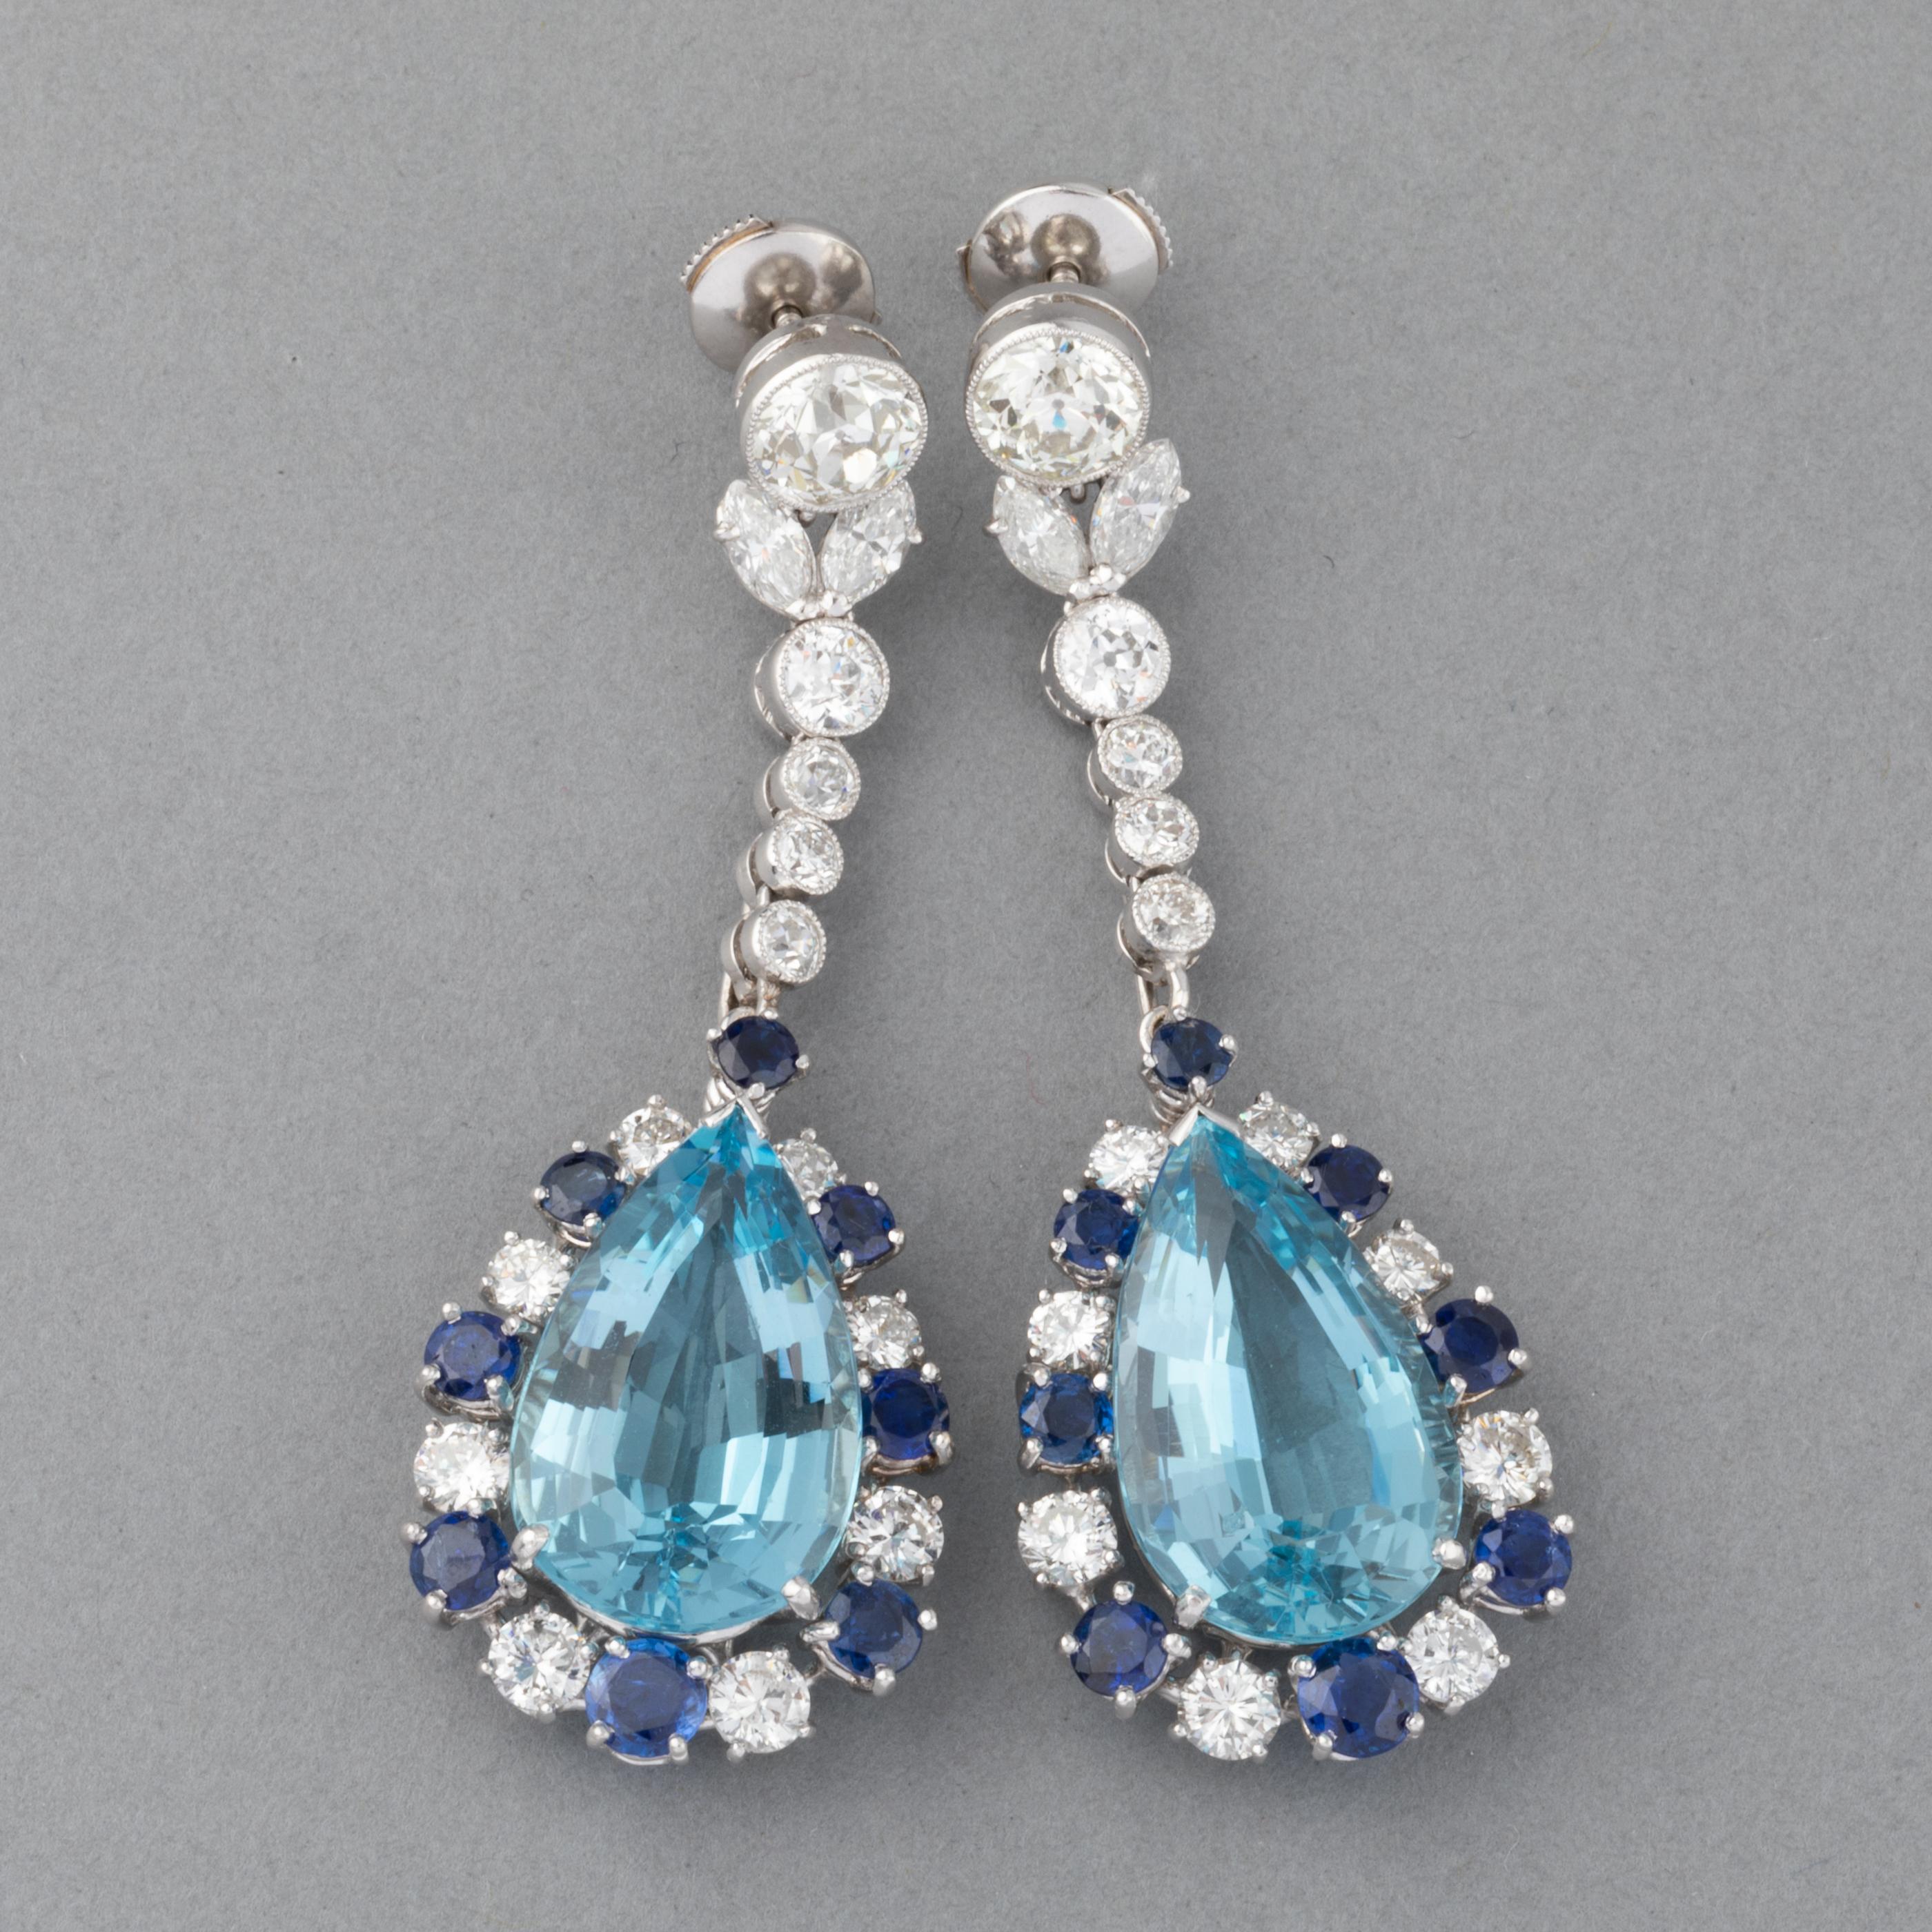 Very beautiful pair of earrings, made in France circa 1960.

They are big: 5.80 cm height of 2.32 inches
Made in white gold 18k for the system, platinum for the diamonds part, gold 14k for the aquamarine cluster. 
The two principal diamonds weights 